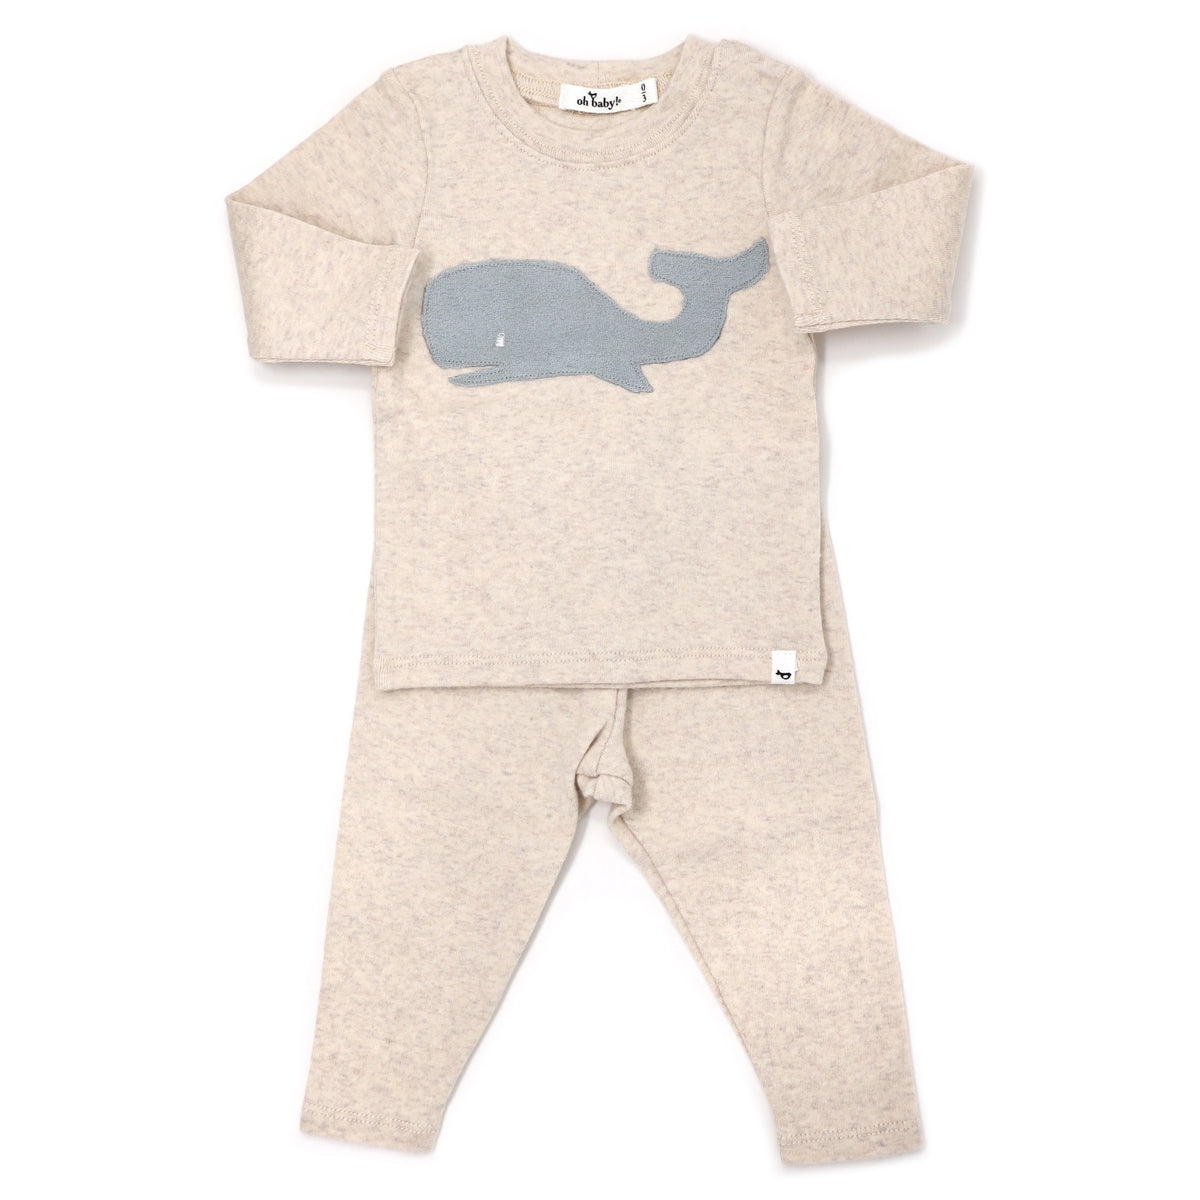 oh baby! Two Piece Set - Whale  Applique - Sand